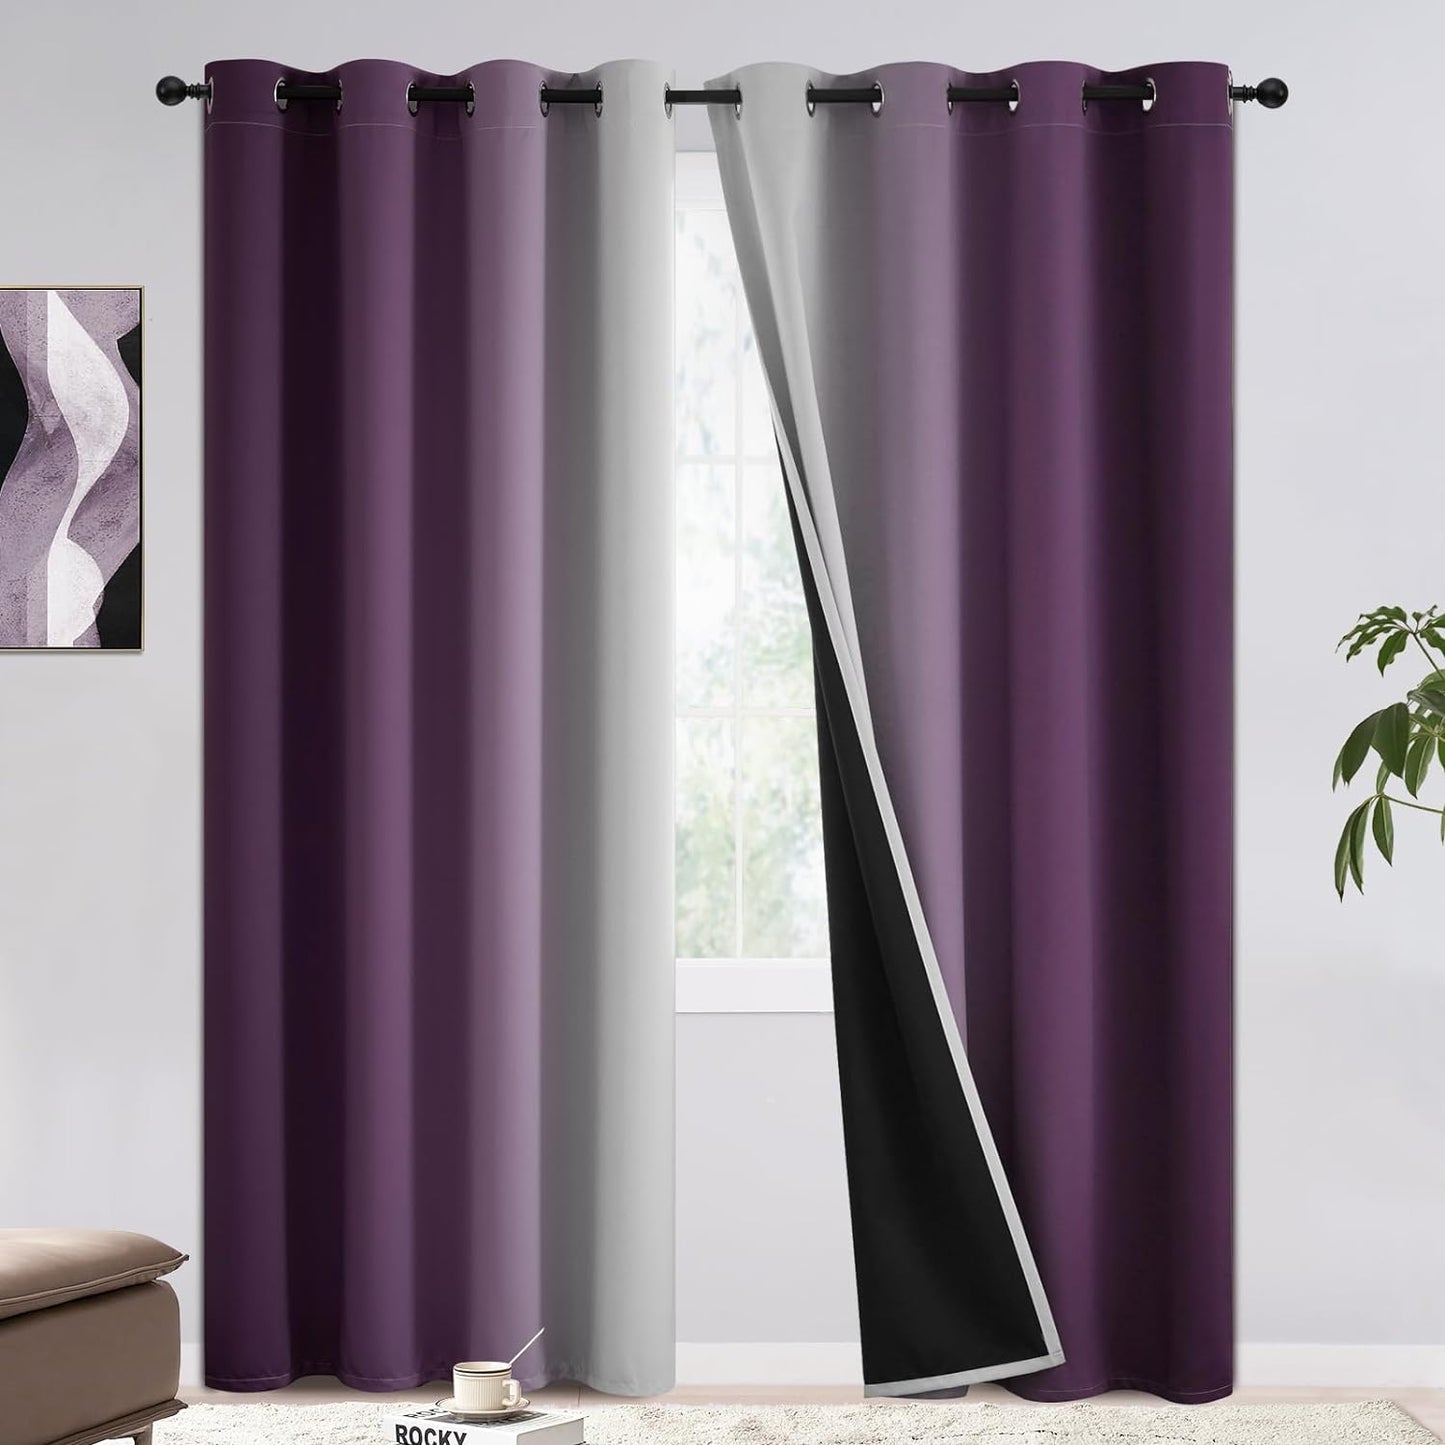 COSVIYA 100% Blackout Curtains & Drapes Ombre Purple Curtains 63 Inch Length 2 Panels,Full Room Darkening Grommet Gradient Insulated Thermal Window Curtains for Bedroom/Living Room,52X63 Inches  COSVIYA Blackout Purple To Grayish White 52W X 95L 